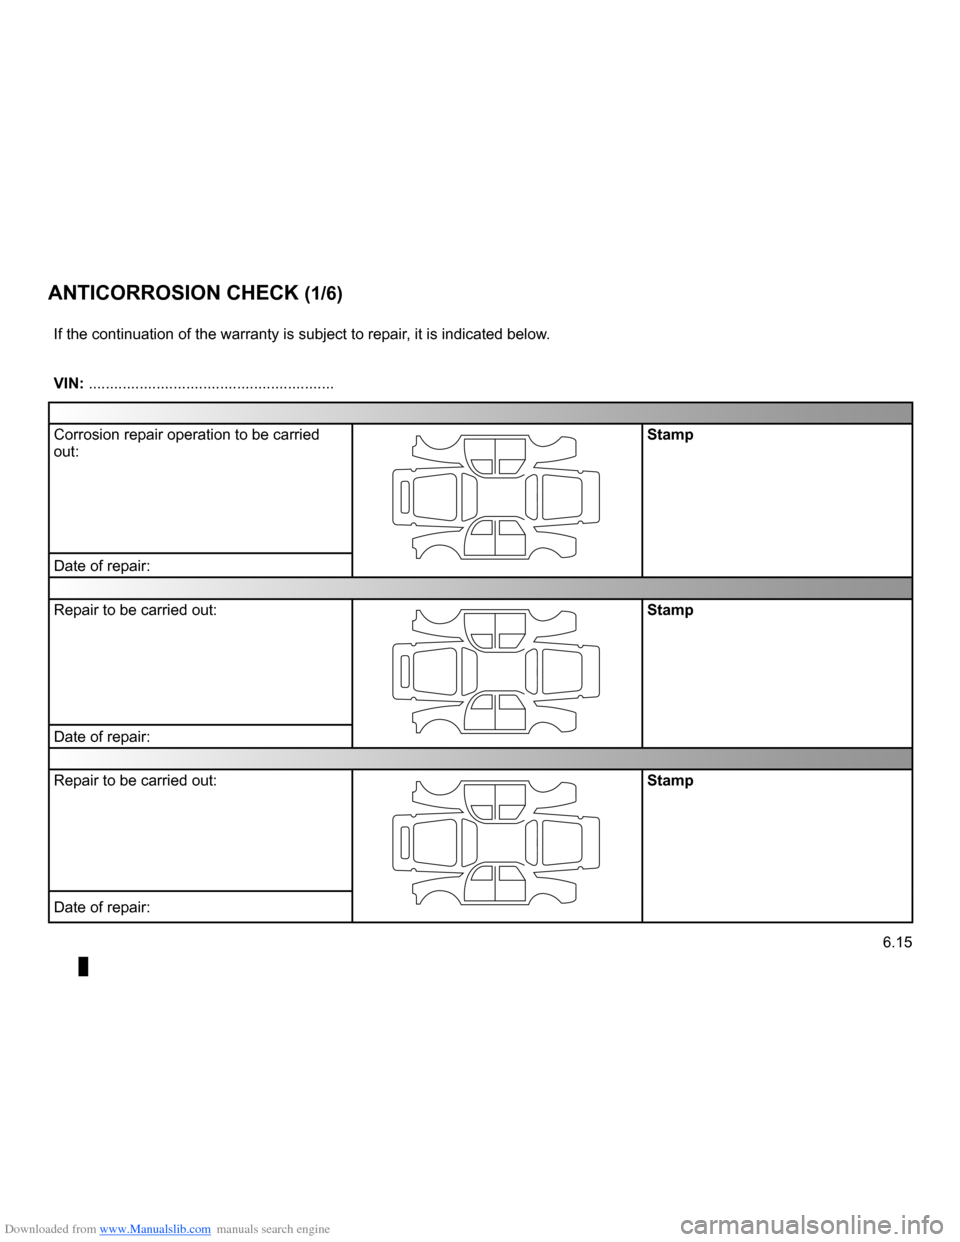 RENAULT CLIO 2009 X85 / 3.G Owners Manual Downloaded from www.Manualslib.com manuals search engine 
anti-corrosion check .............................(up to the end of the DU)
6.15
ENG_UD10976_1Contrôle anticorrosion (1/6) (X84 - X85 - X95 -